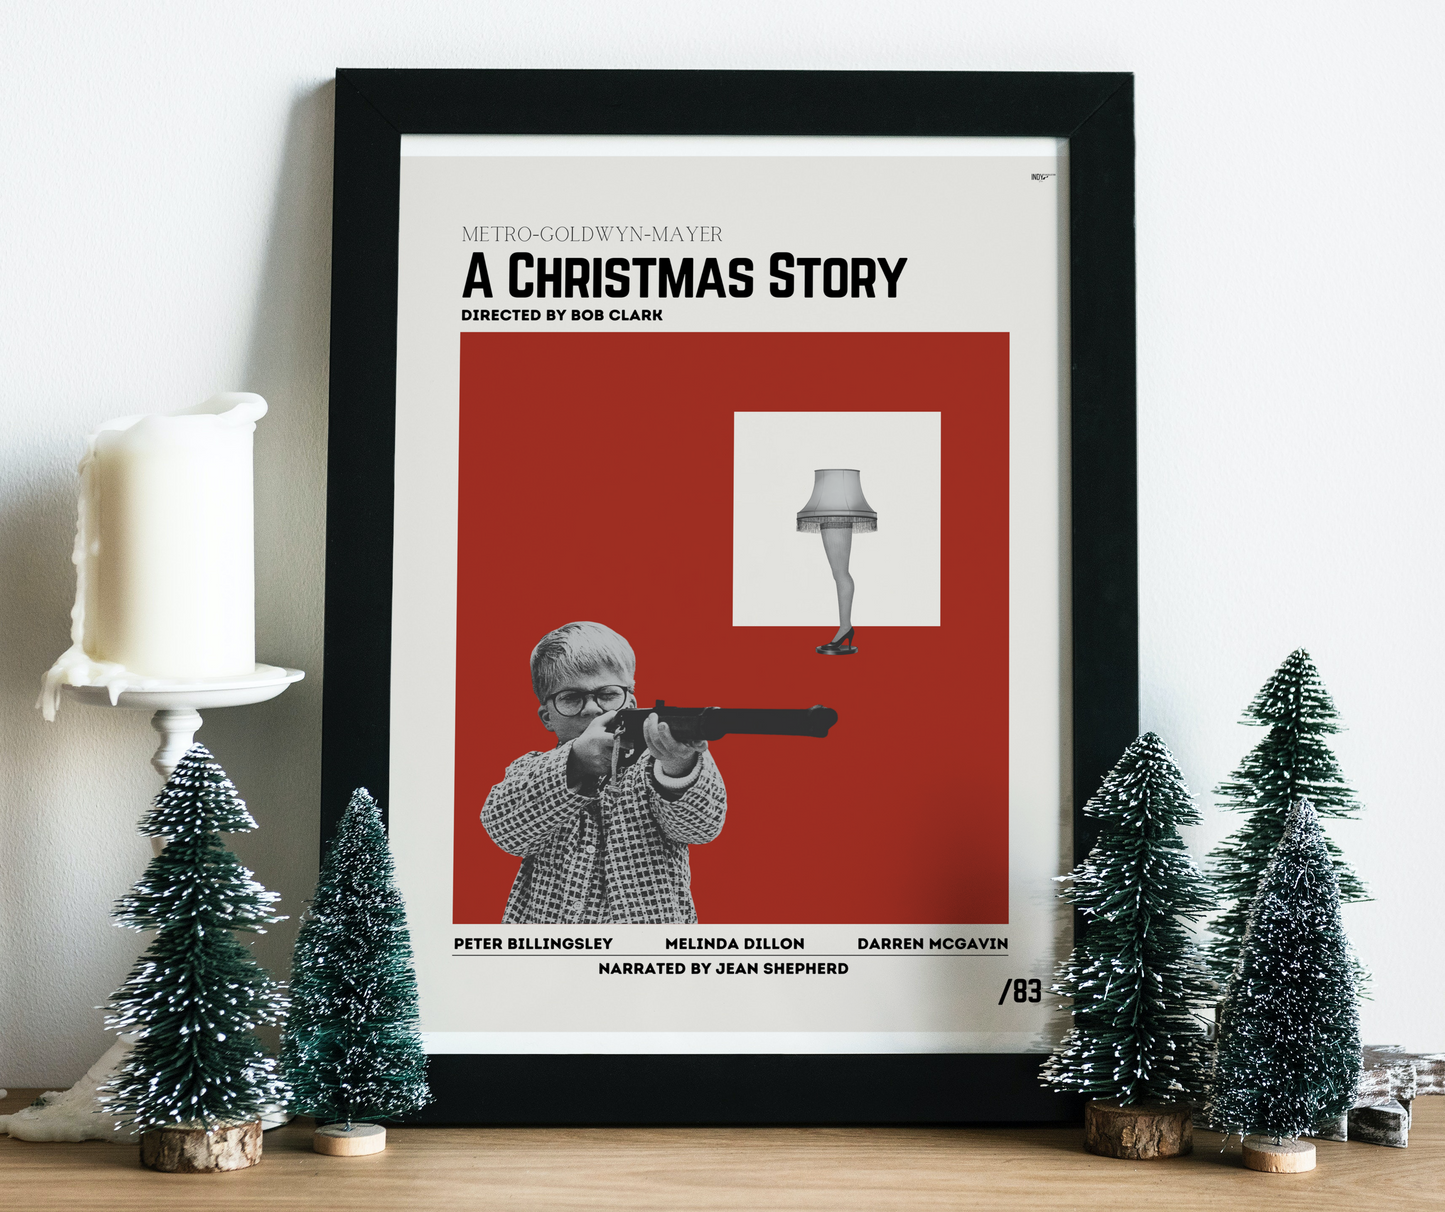 "A Christmas Story" Mid-Century Modern Film Poster